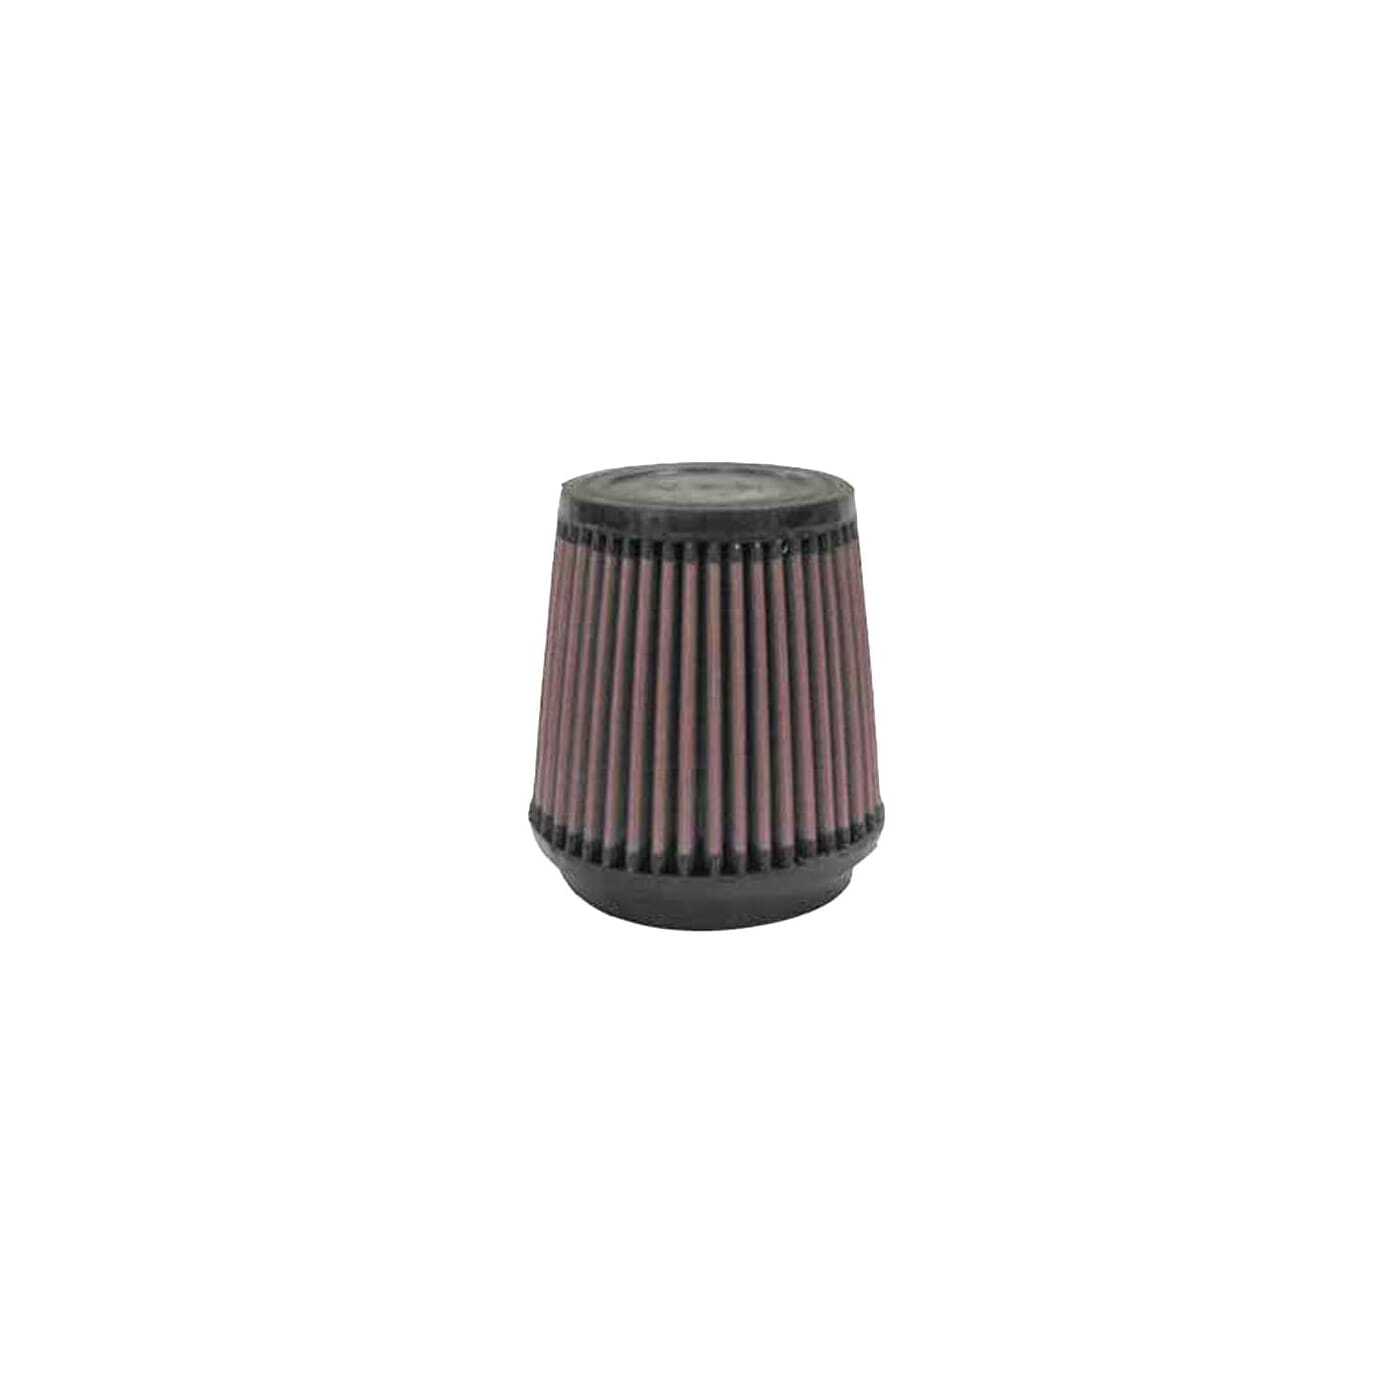 89 mm 114 mm 117 mm Top Base; 3.5 in Height; 4.625 in Flange ID; 4.5 in 89 mm K&N RU-2790 Universal Clamp-On Air Filter: Round Tapered; 3.5 in 